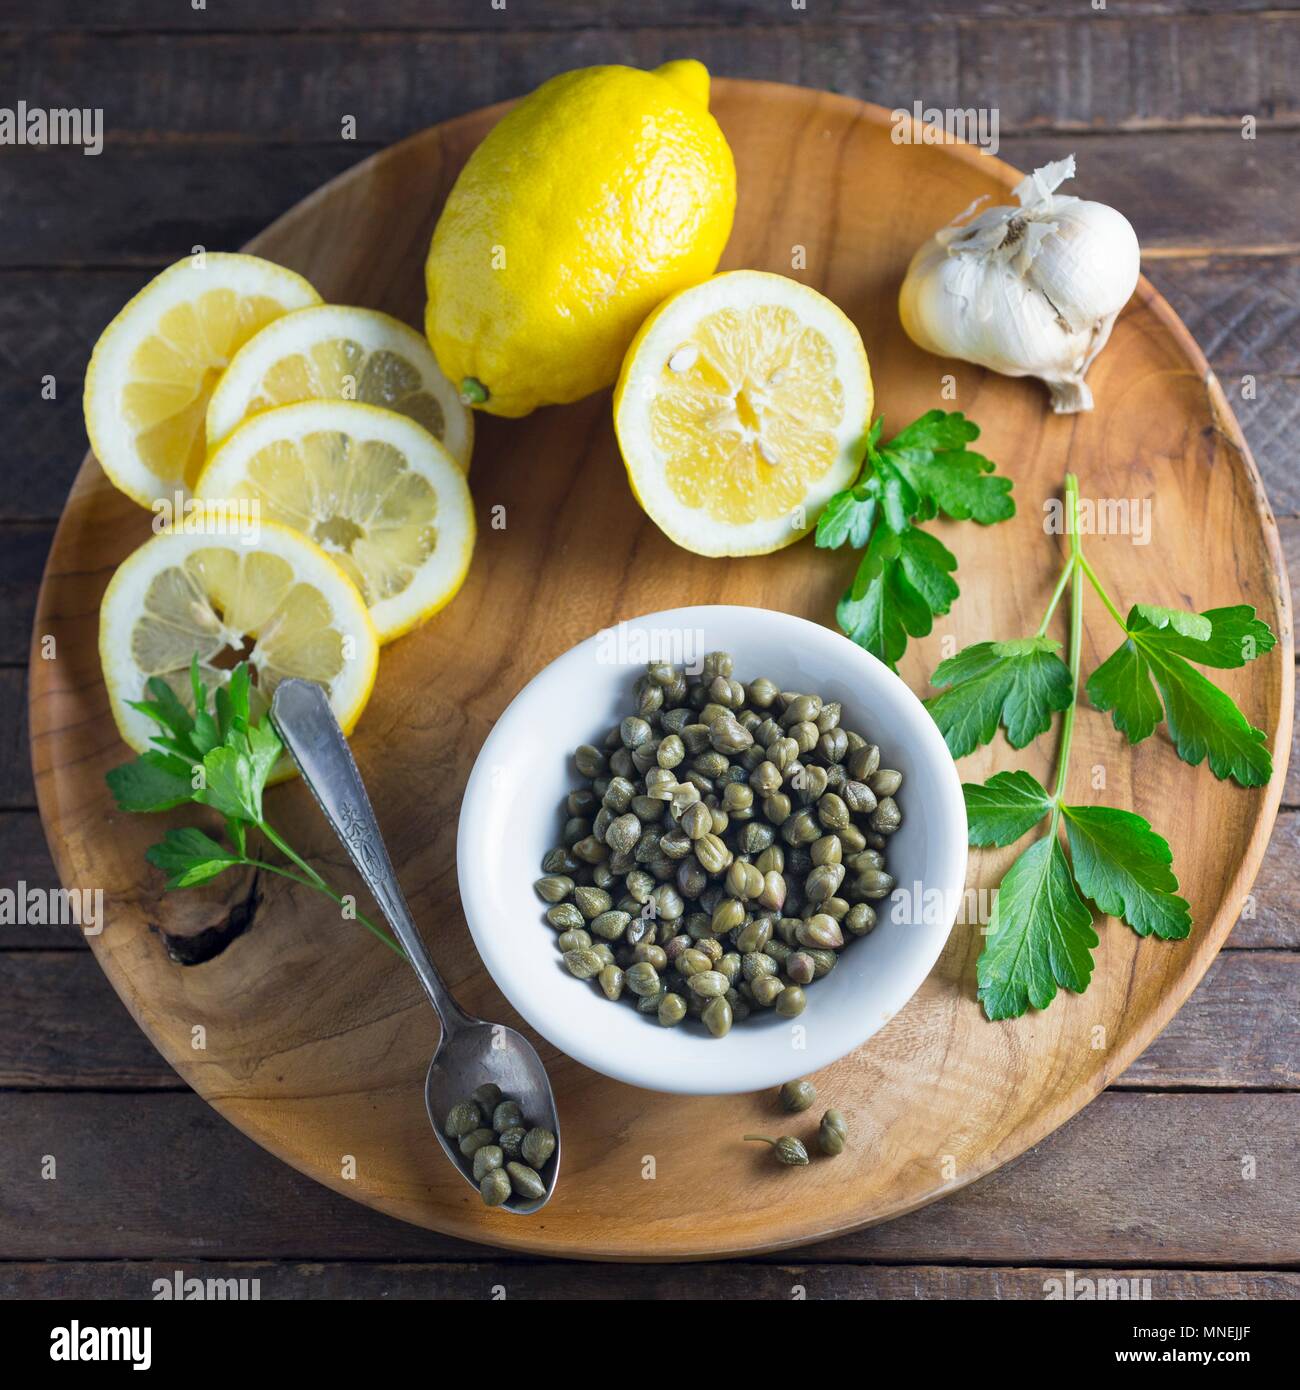 Lemons, capers, garlic and parsley on a wooden plate Stock Photo